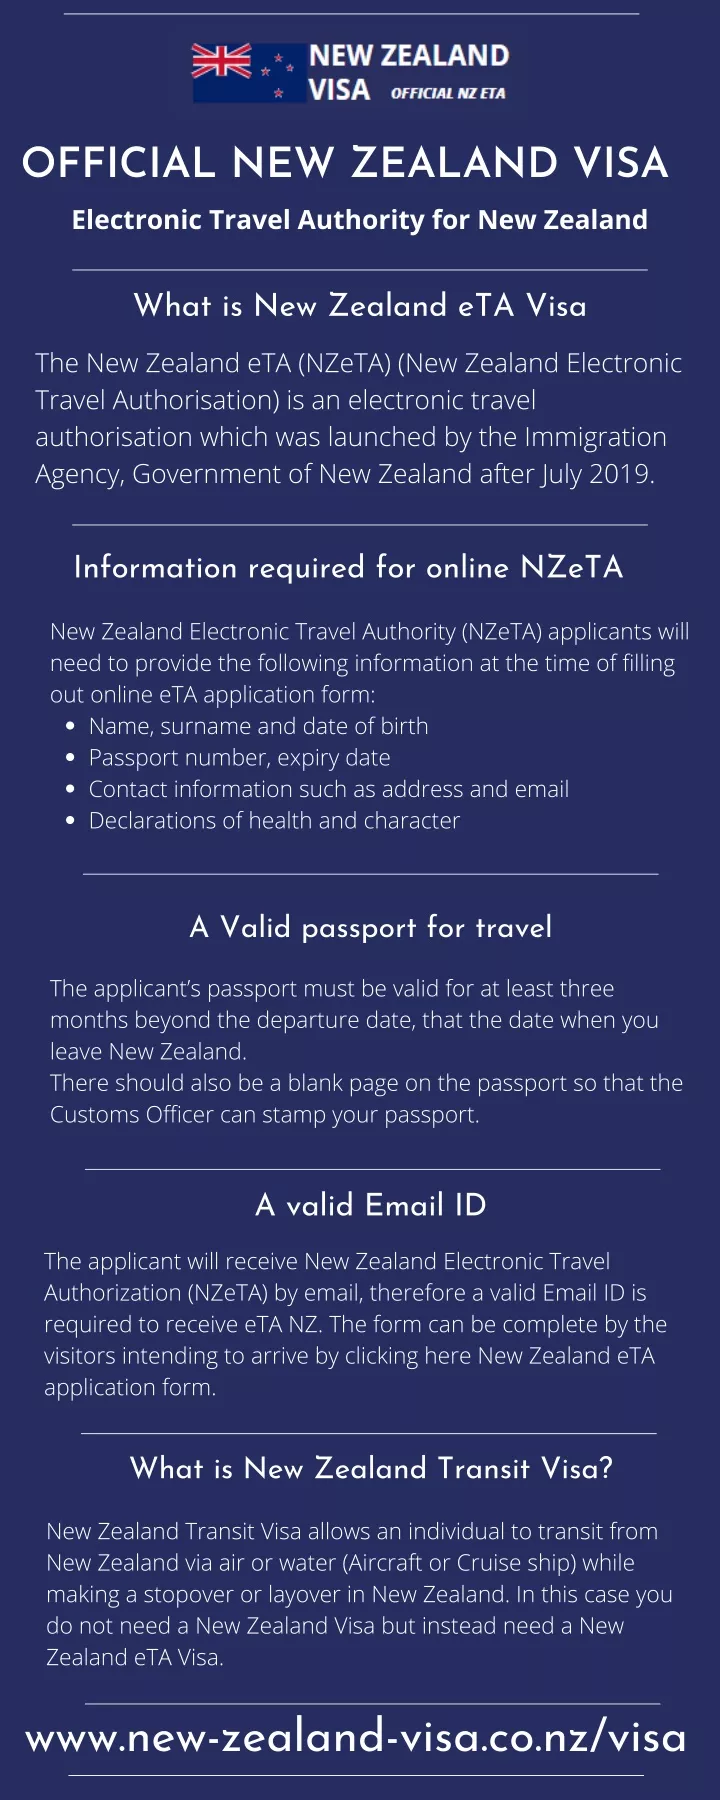 Ppt Official New Zealand Visa Nzeta Electronic Travel Authority For New Zealand Powerpoint 3950